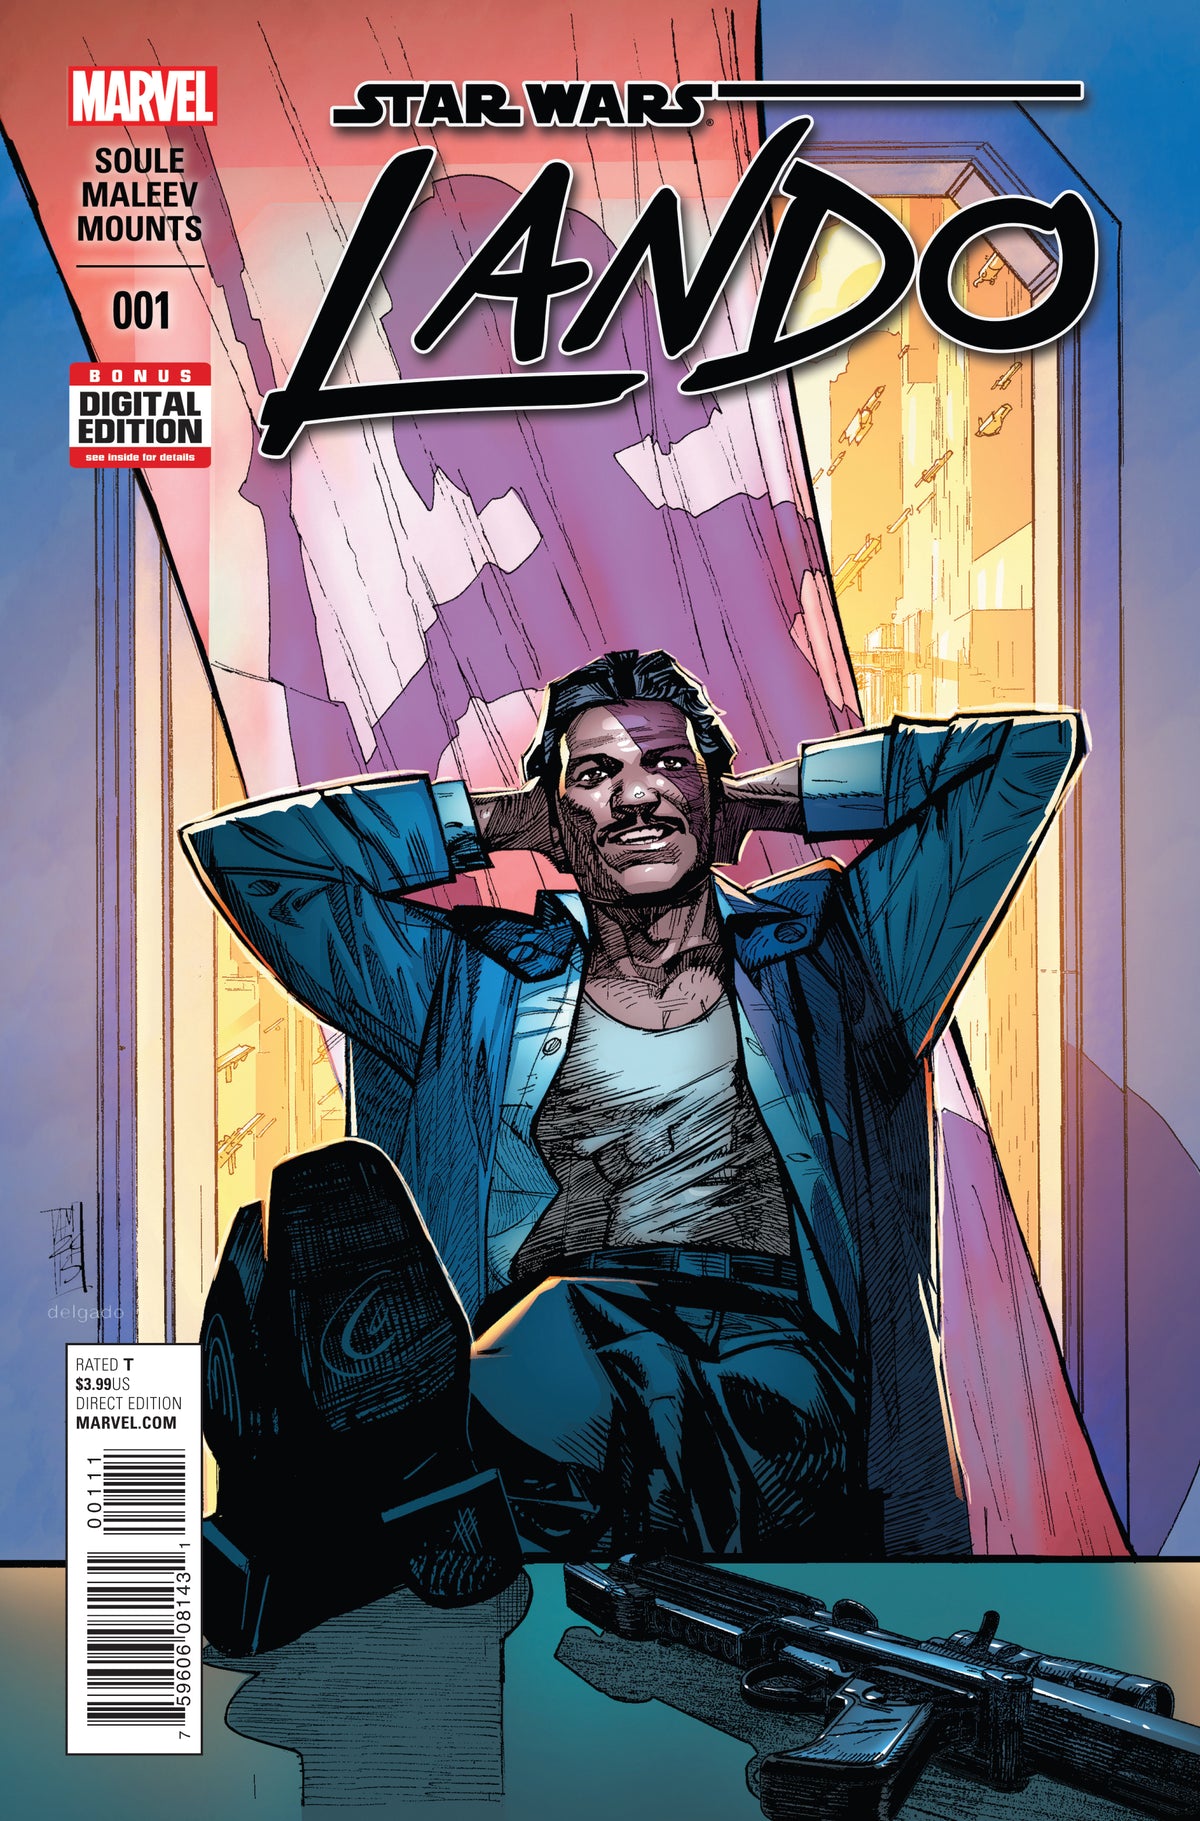 Star Wars Lando 1 (of 5) comic sold by Stronghold Collectibles